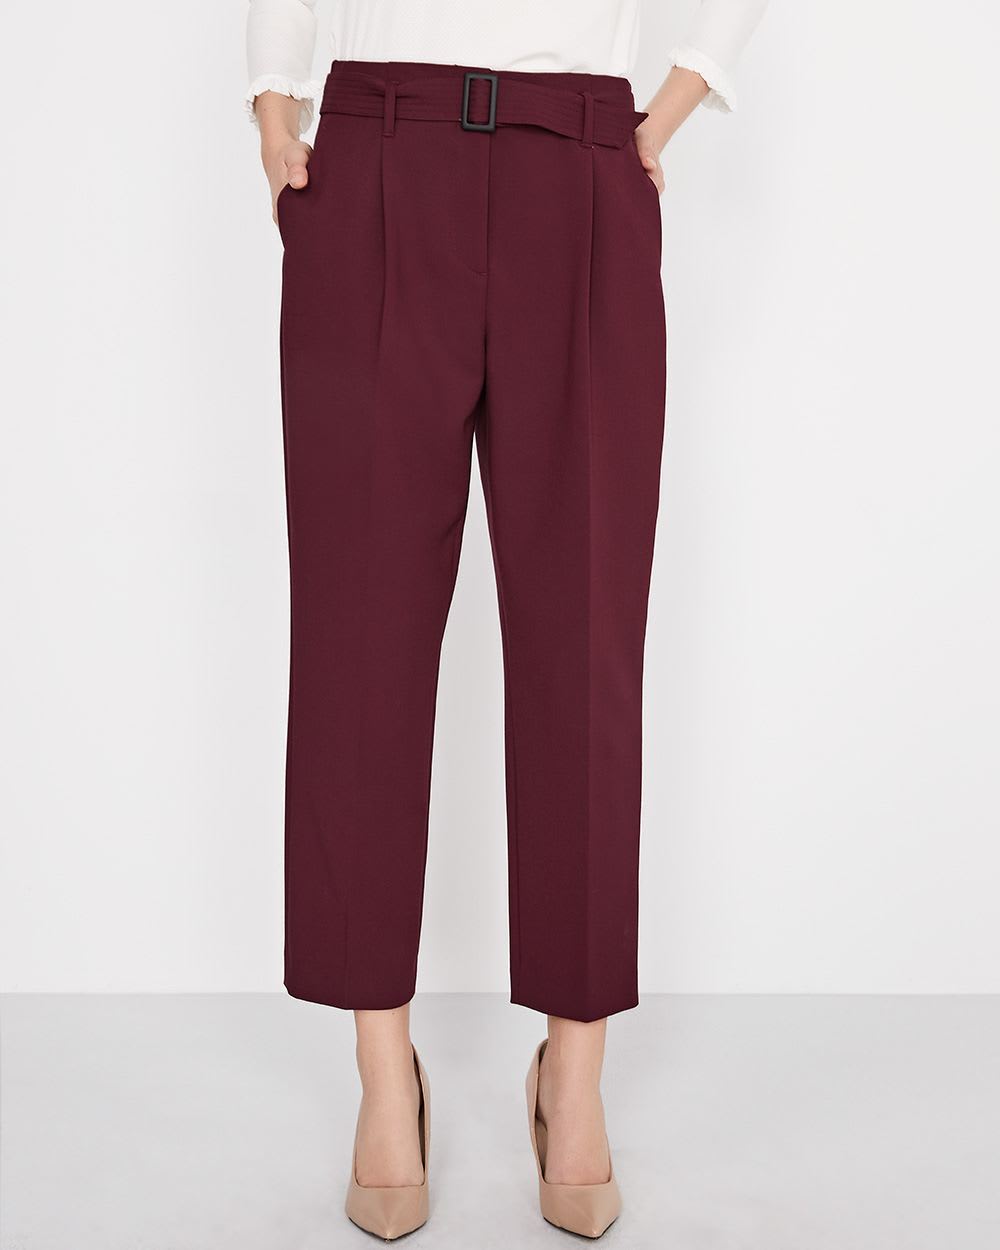 High-waist paper bag pant with belt | RW&CO.